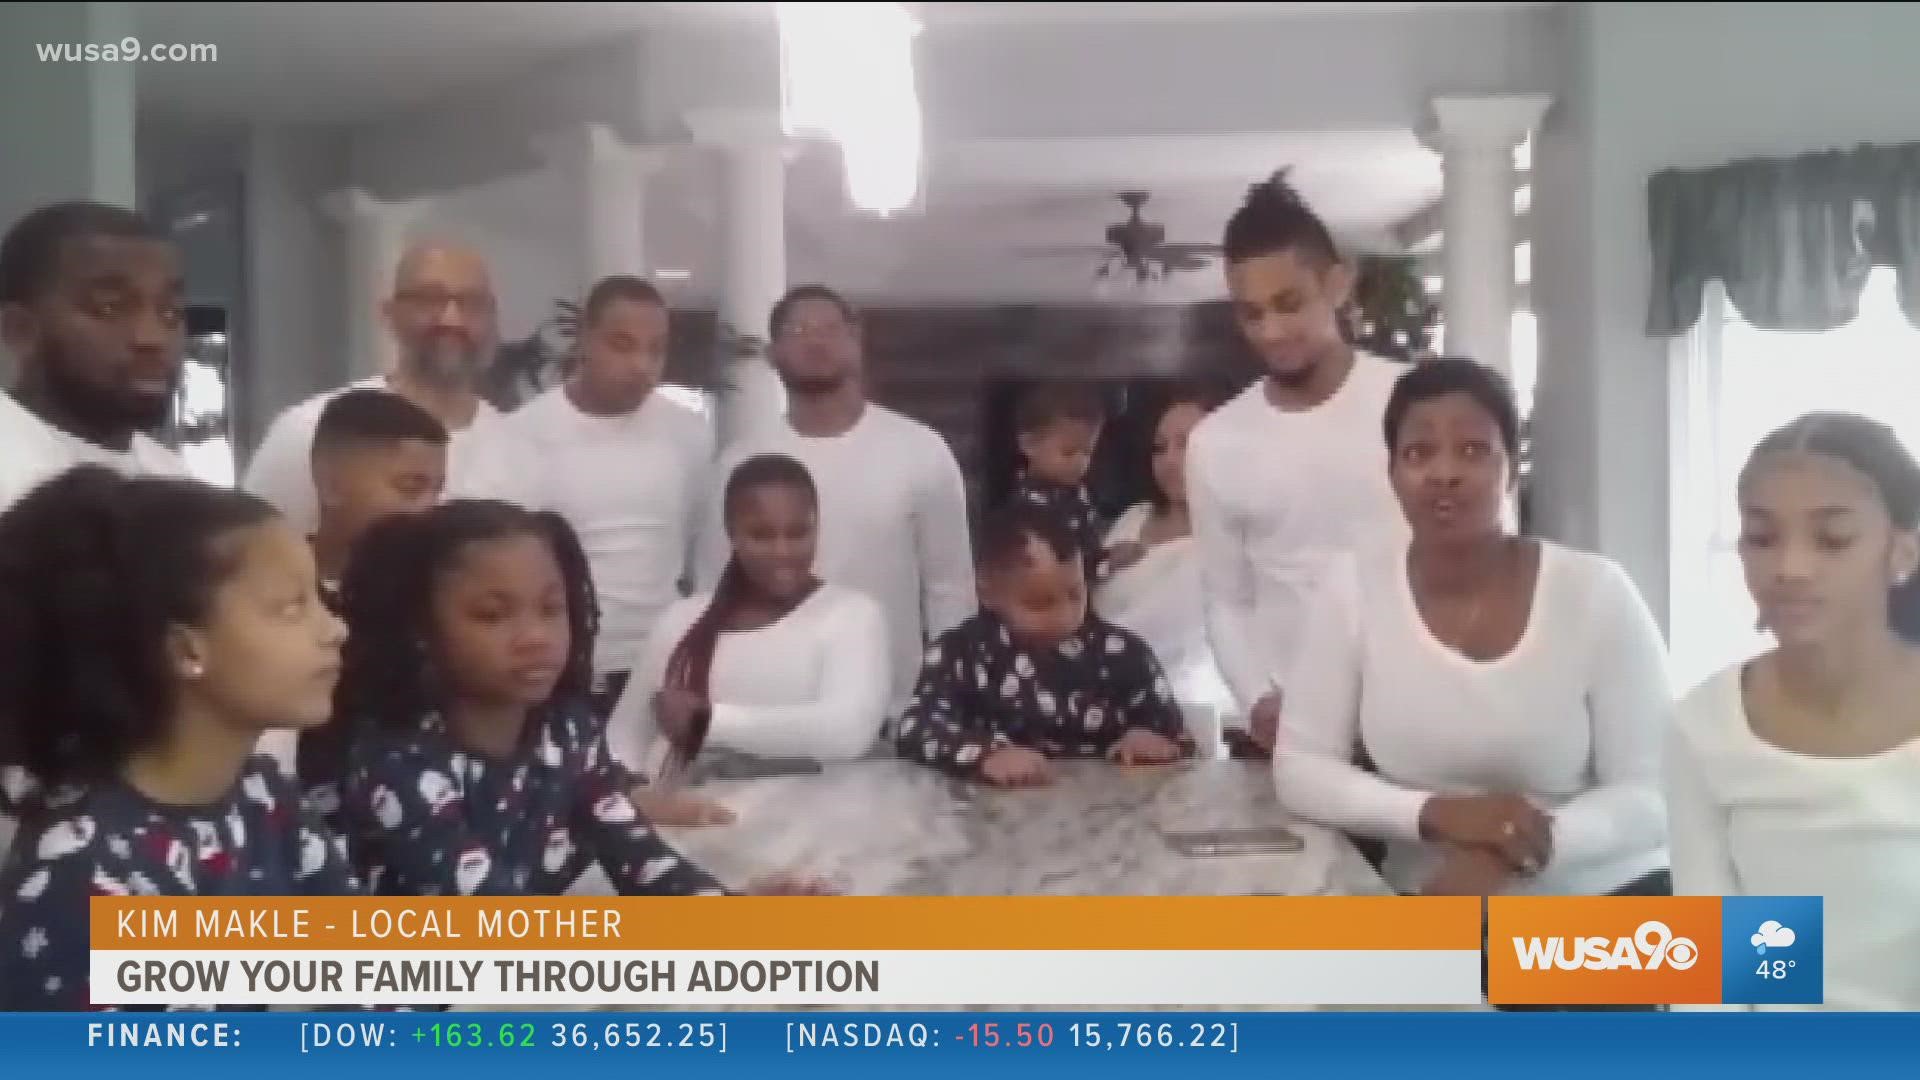 Judge Tara J. Fentress and the Makle family share about the joys of adoption.